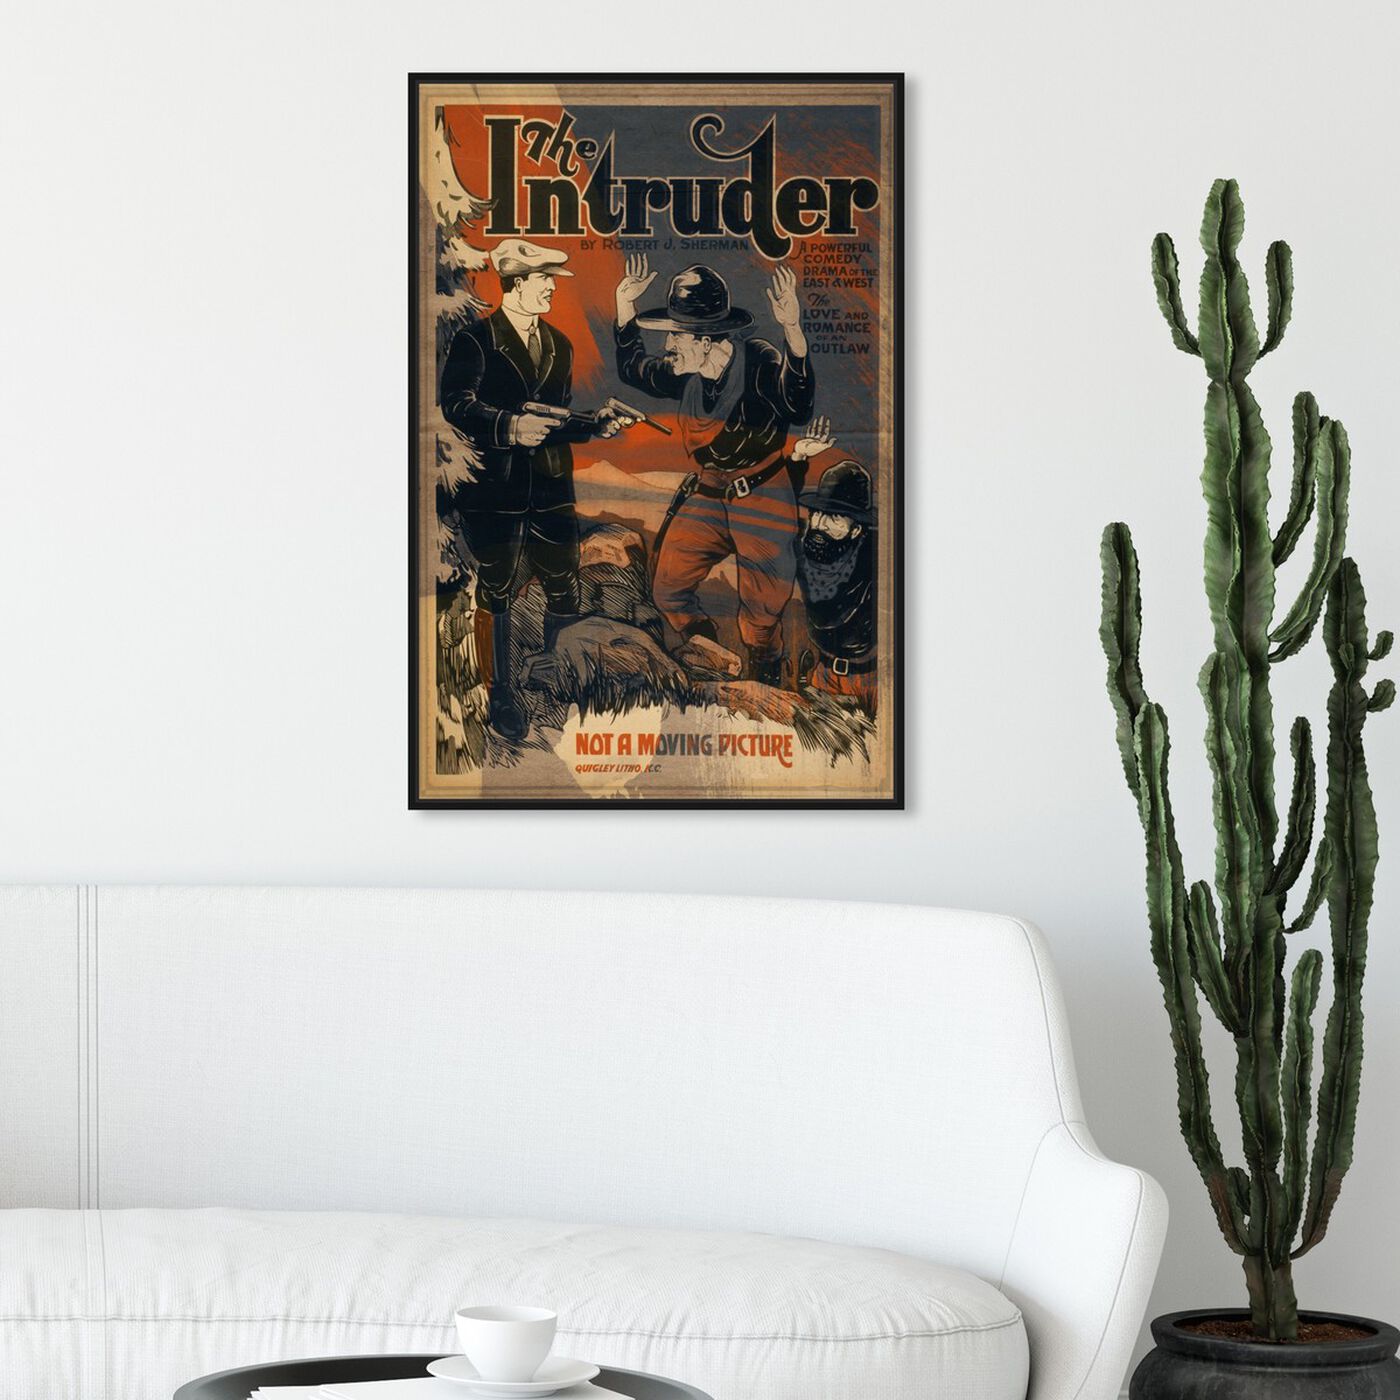 Hanging view of The Intruder featuring advertising and posters art.